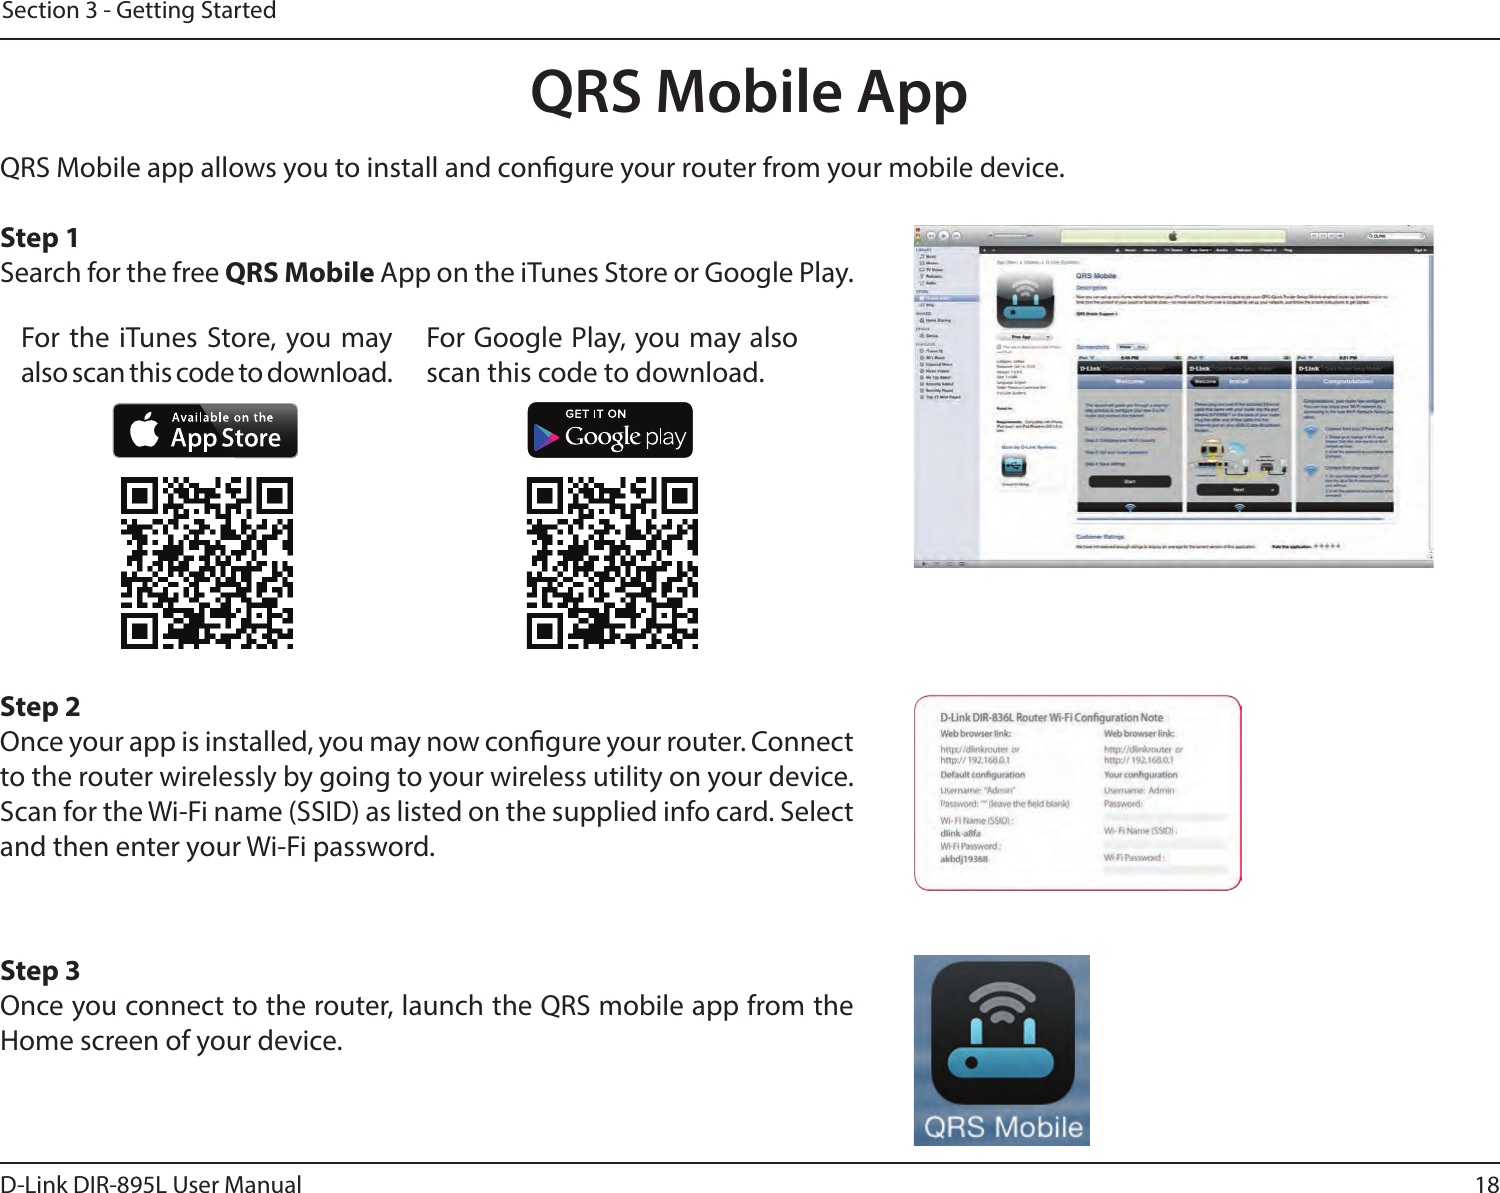 18D-Link DIR-895L User ManualSection 3 - Getting StartedQRS Mobile AppQRS Mobile app allows you to install and congure your router from your mobile device. Step 1Search for the free QRS Mobile App on the iTunes Store or Google Play.Step 2Once your app is installed, you may now congure your router. Connect to the router wirelessly by going to your wireless utility on your device. Scan for the Wi-Fi name (SSID) as listed on the supplied info card. Select and then enter your Wi-Fi password.Step 3Once you connect to the router, launch the QRS mobile app from the Home screen of your device.For the iTunes Store, you may also scan this code to download.For Google Play, you may also scan this code to download.